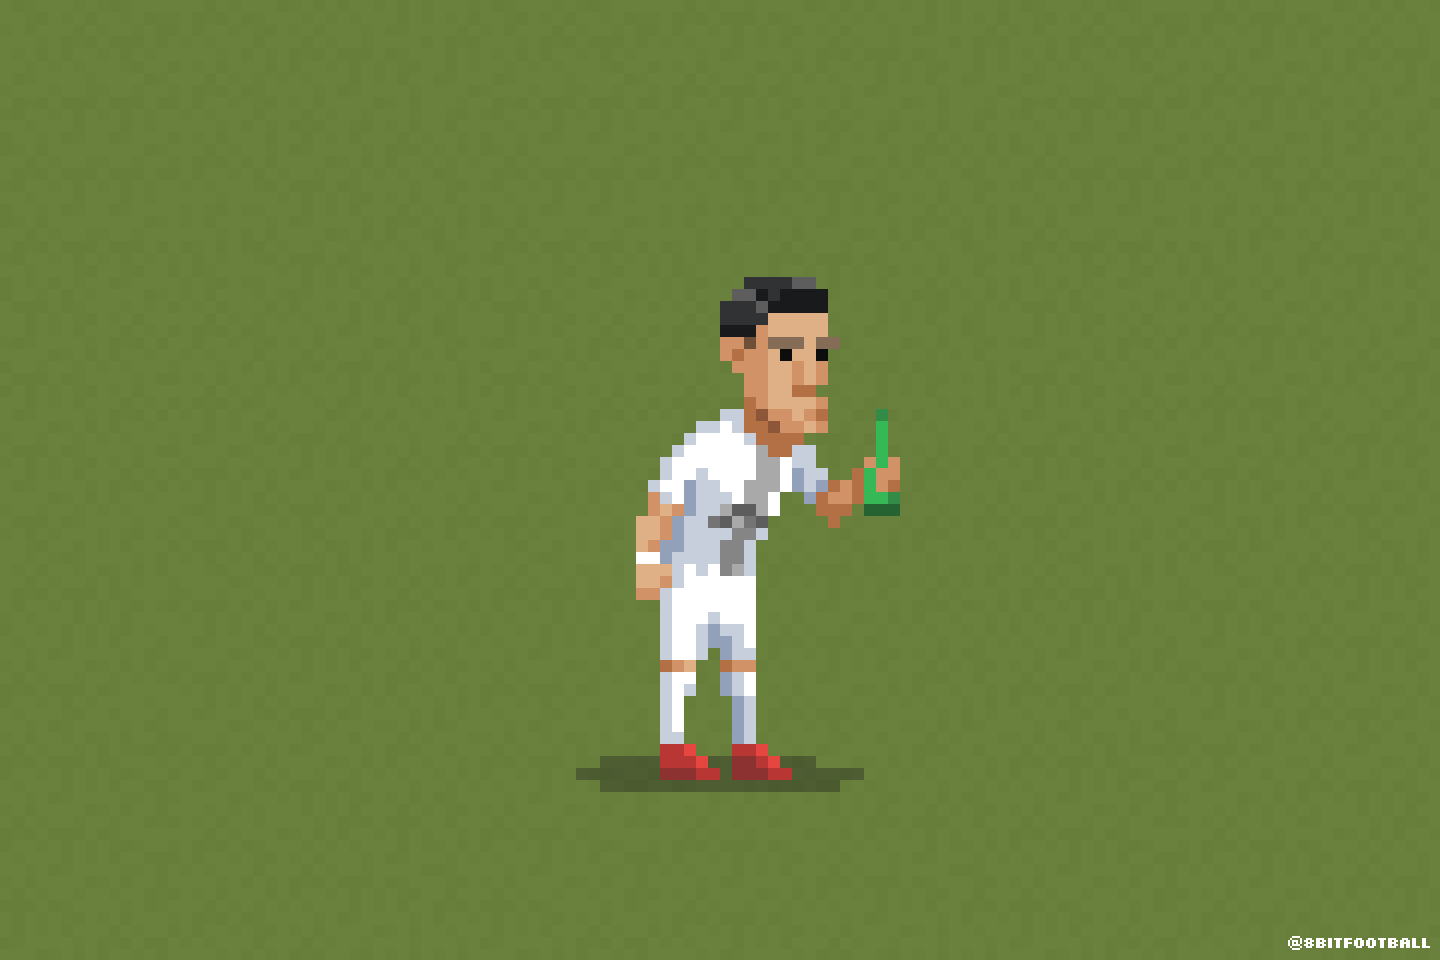 Di Maria and the beer